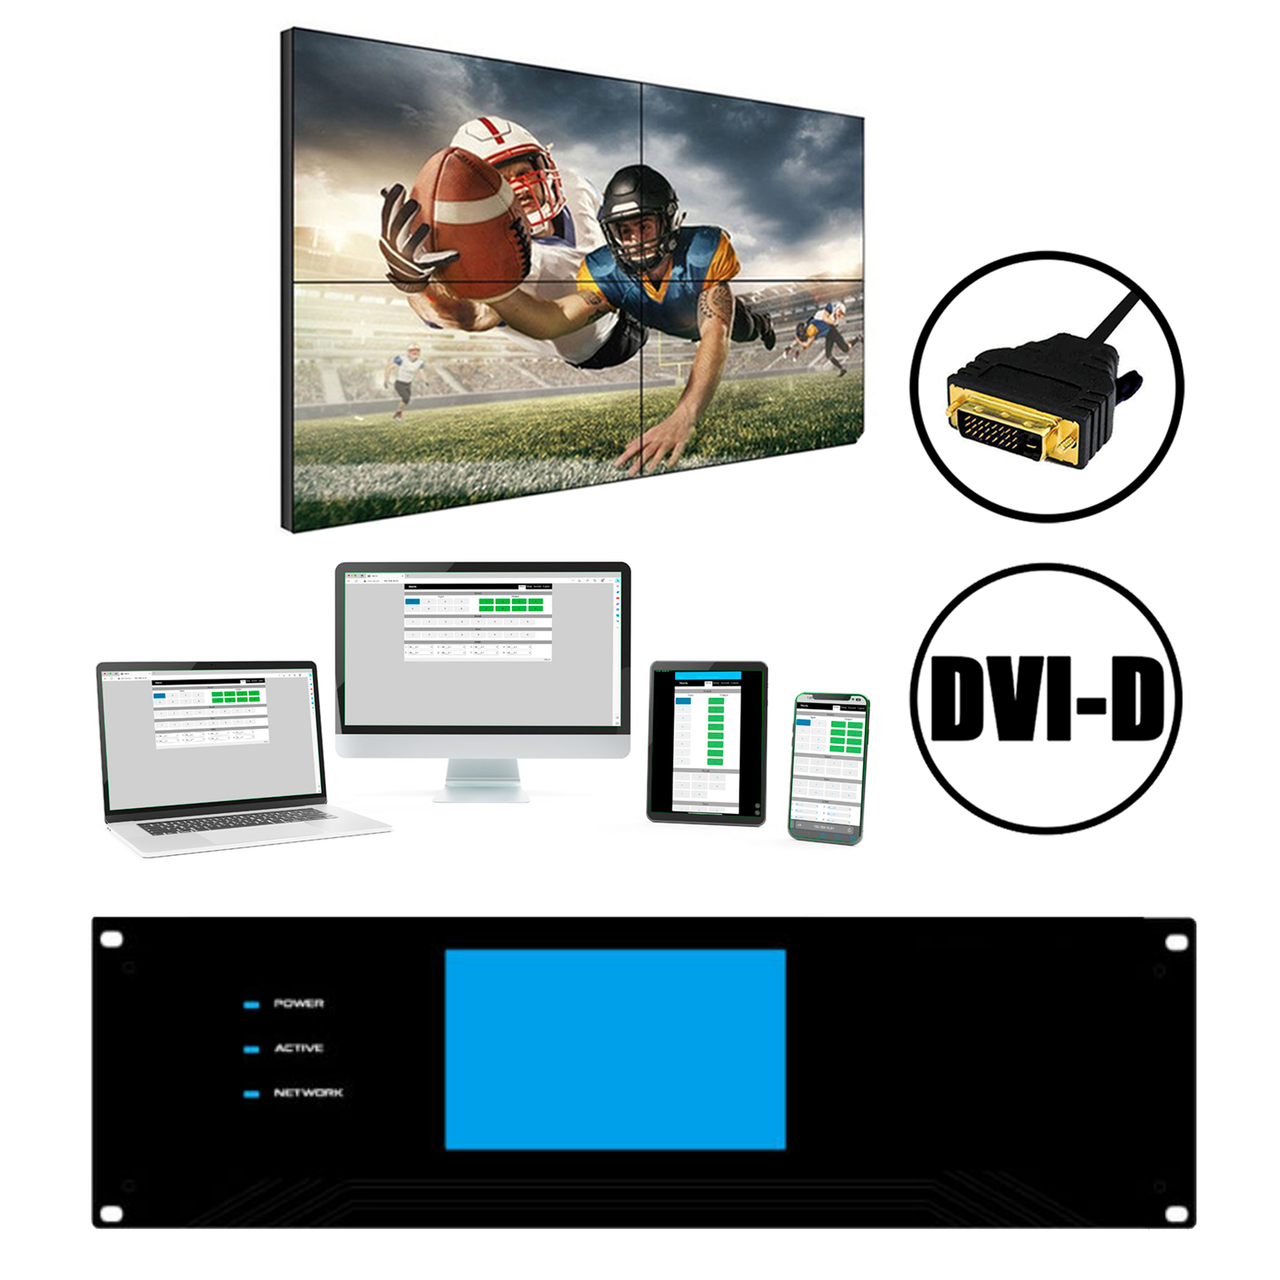 Up To 16x16 DVI Matrix Switchers with Video Walls